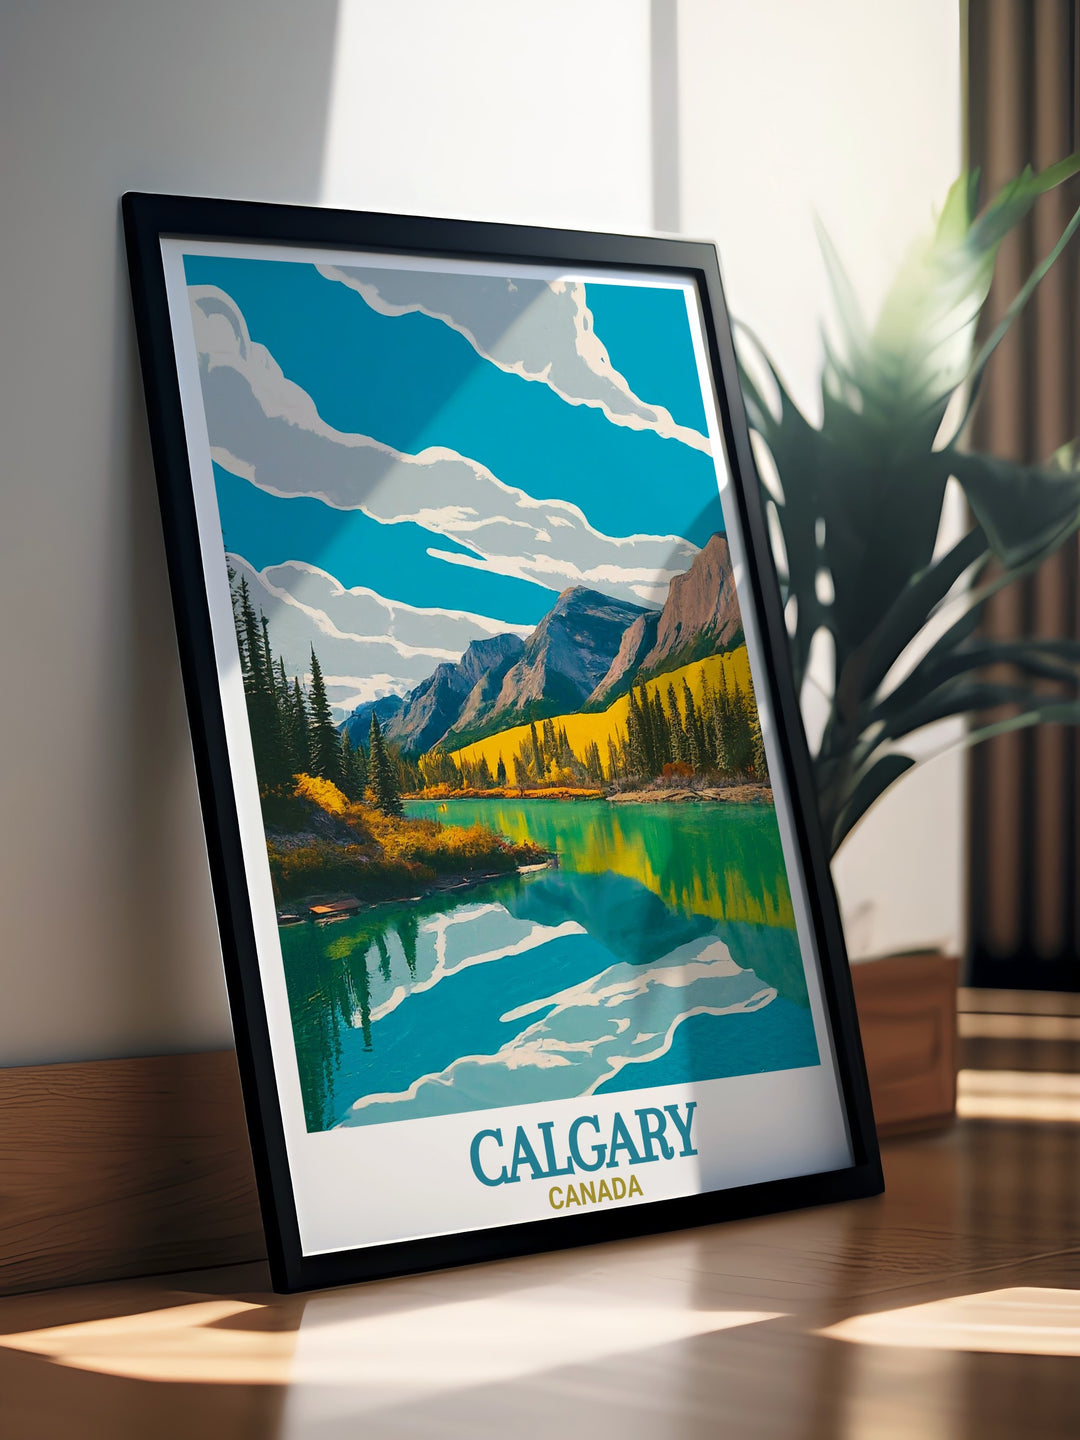 Celebrate the tranquility of Fish Creek Provincial Park with this beautiful Canada gift. Perfect for birthdays anniversaries or special occasions this print brings the parks serene landscapes into your home creating a peaceful atmosphere.